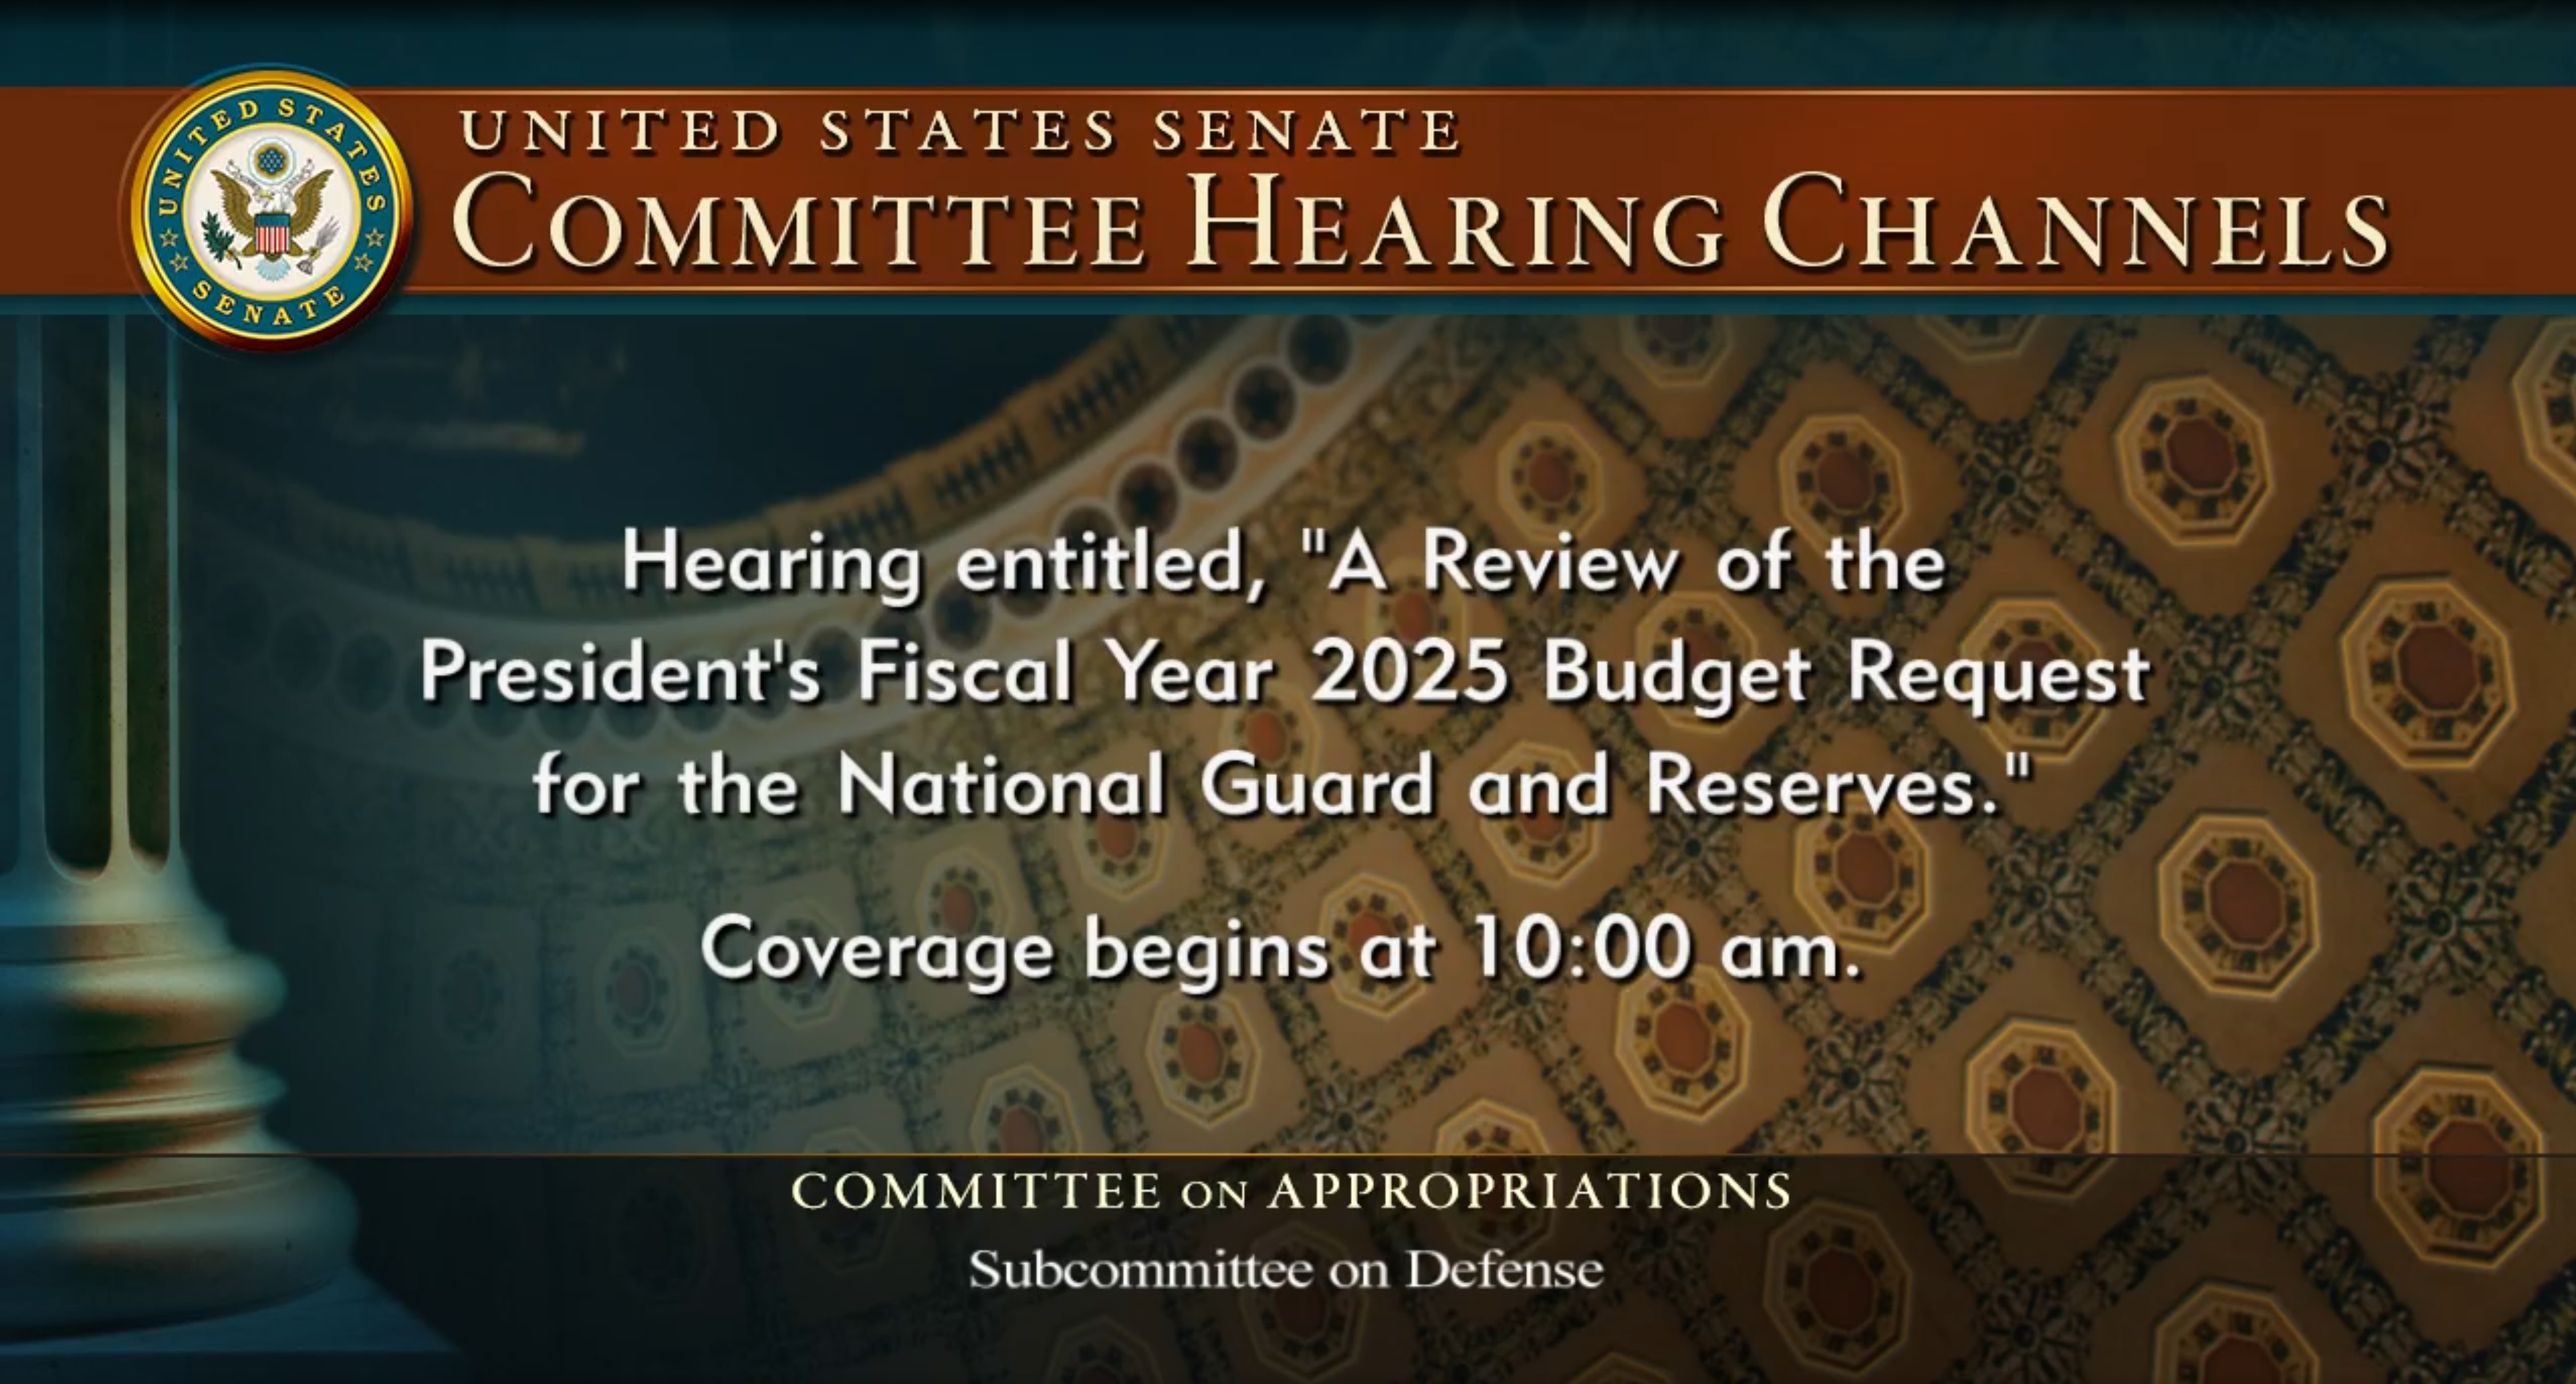 Senate hearing graphic linking to video for live coverage